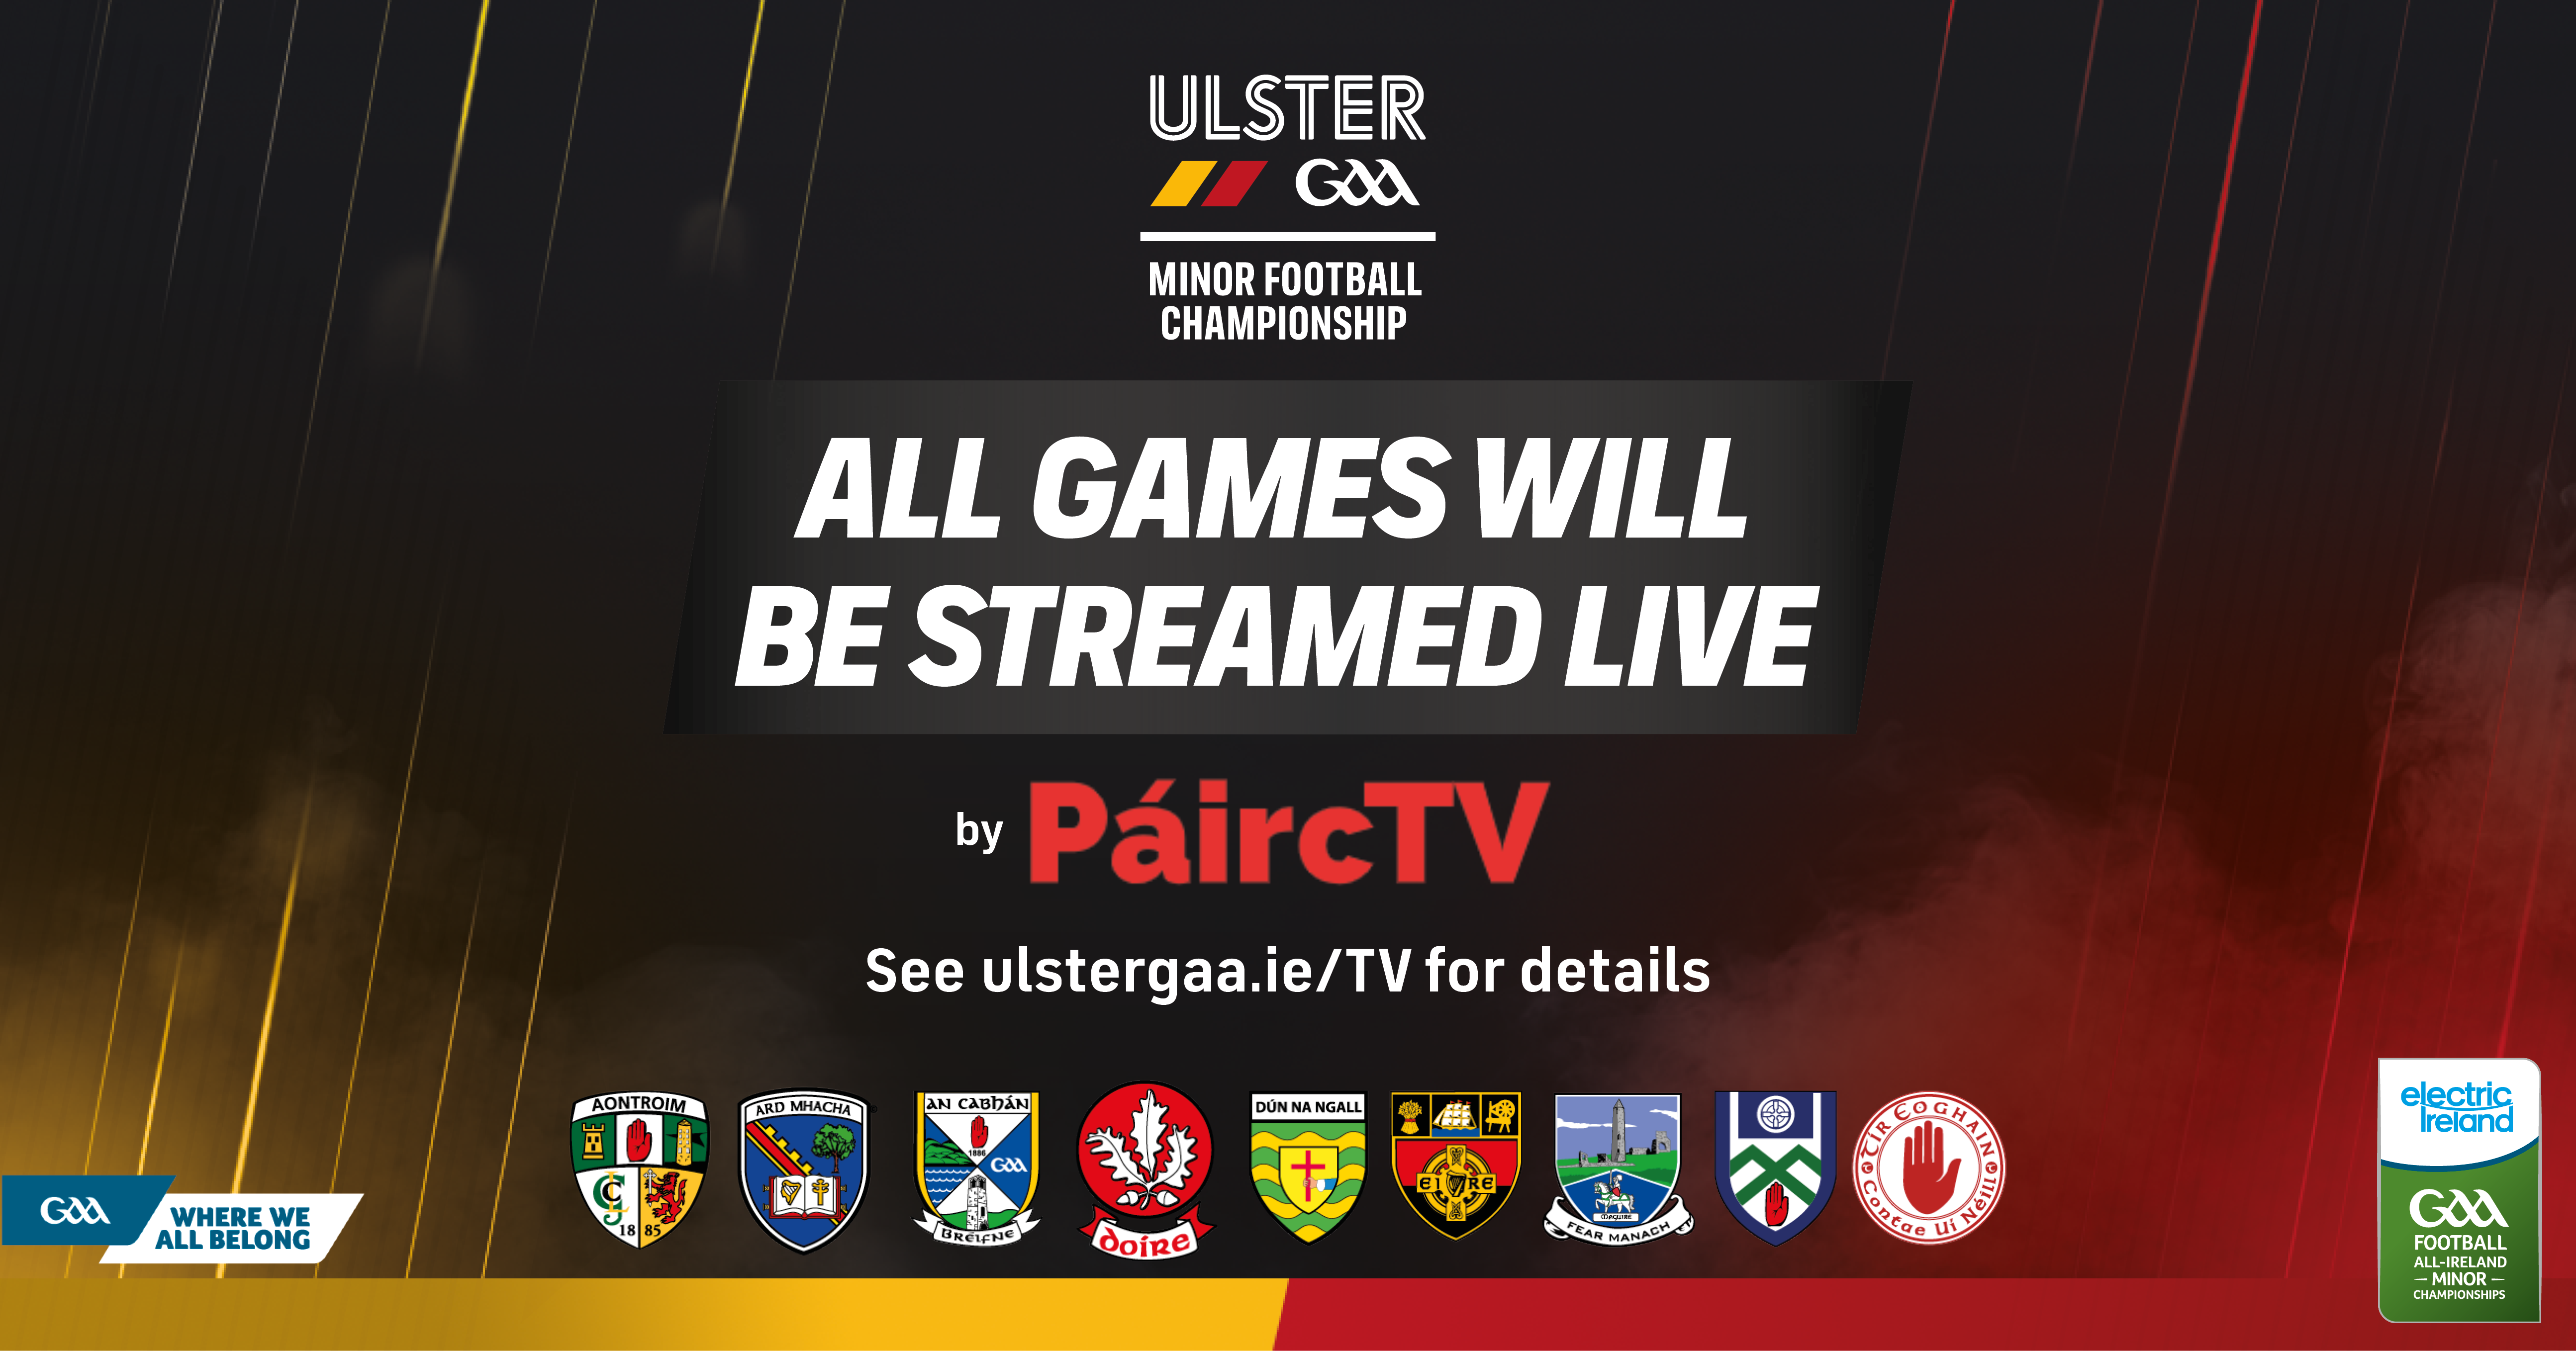 Ulster GAA announces streaming service for Minor Football Championship